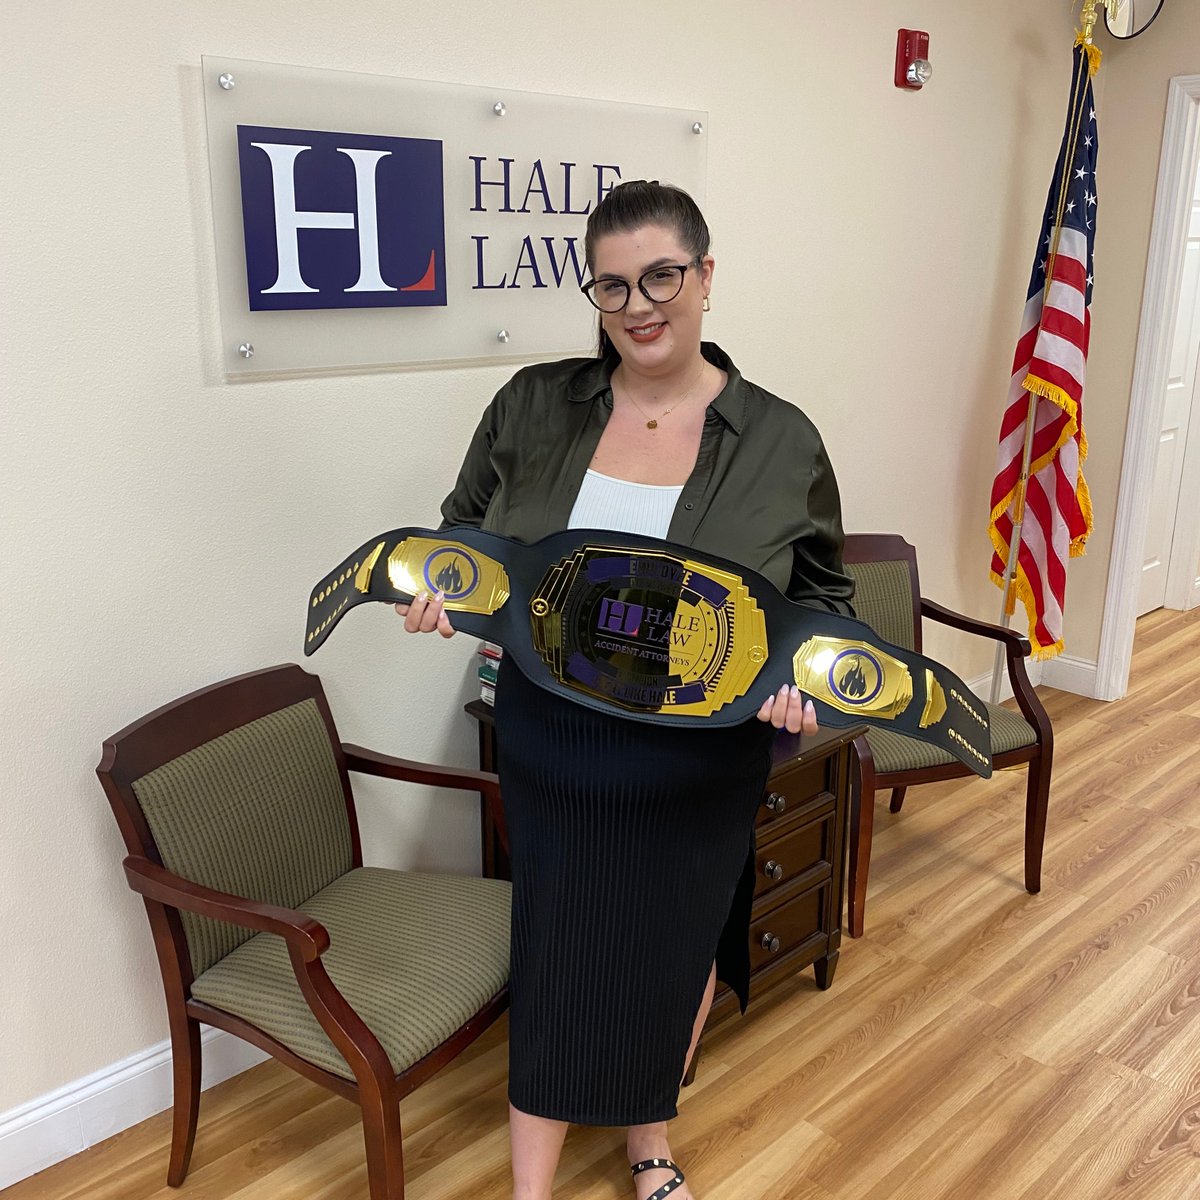 Congratulations to Gabrielle, our exceptional #IntakeParalegal, for being named the latest #EmployeeOfTheWeek! Your dedication and client-focused approach are truly commendable. 👏🌟 #PersonalInjuryLaw #GoToHale #FightLikeHale #GiveEmHale #Champion